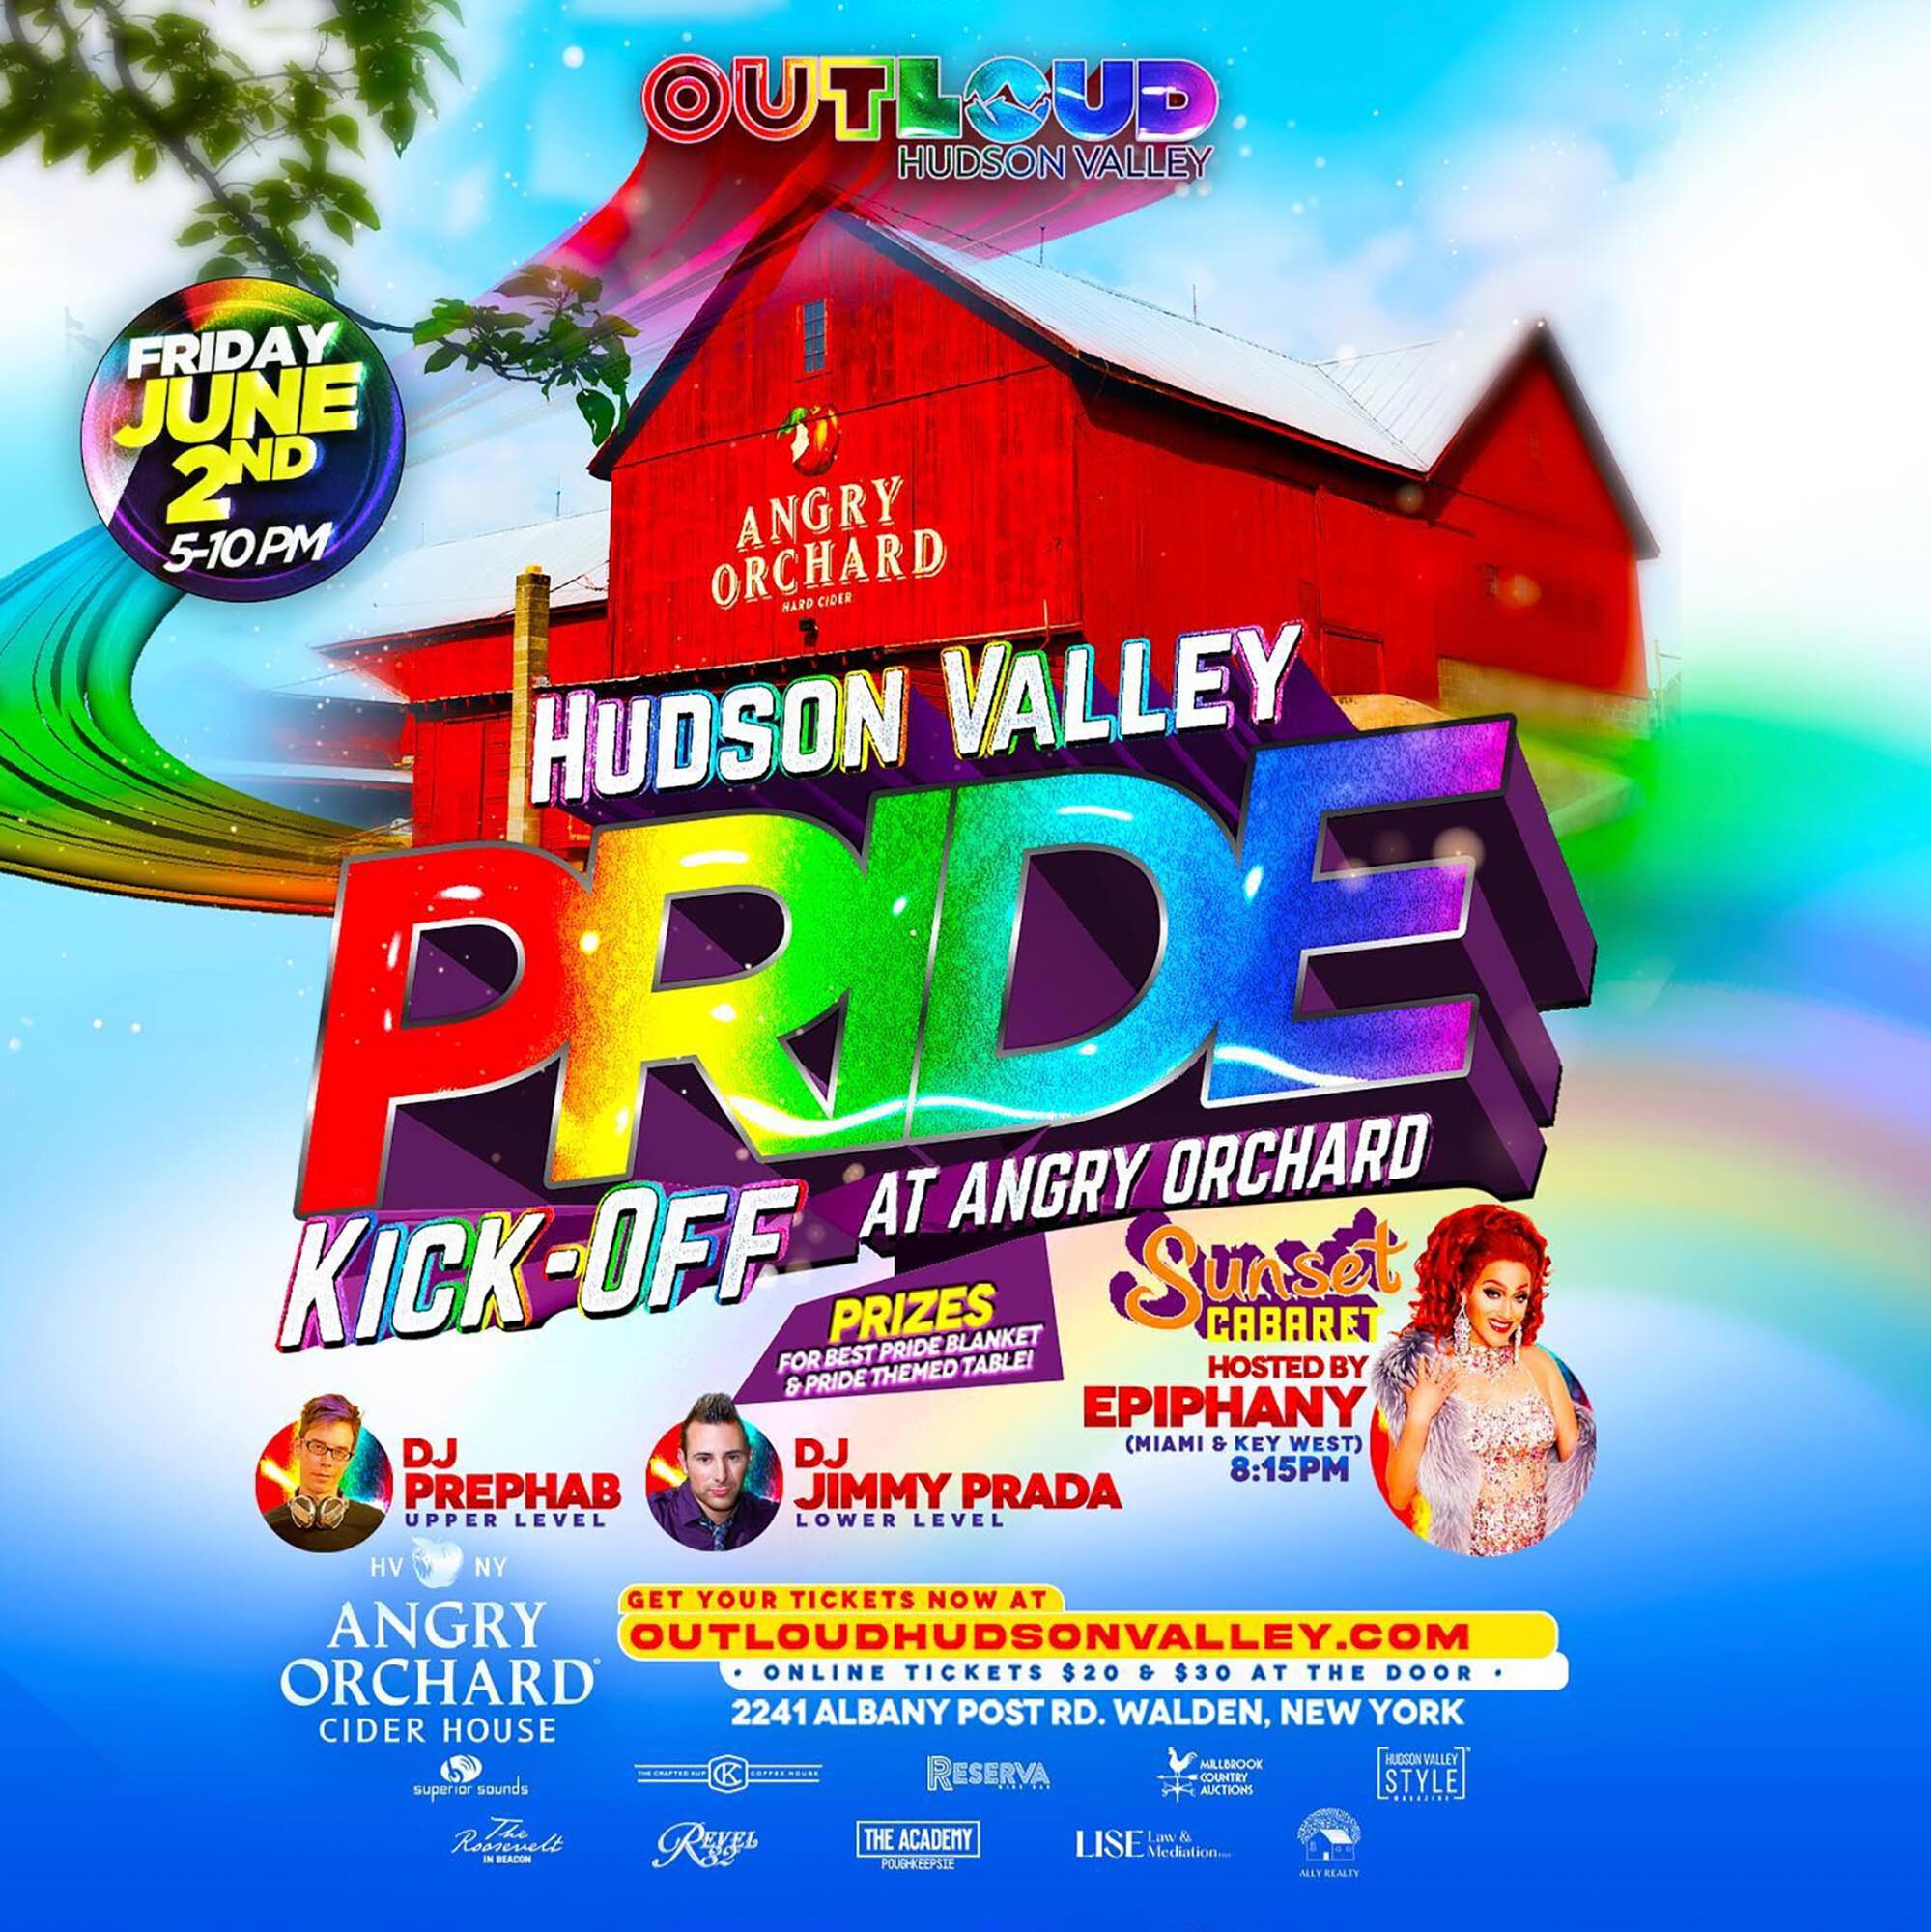 Hudson Valley Pride Kick-Off Party at Angry Orchard with Epiphany Get Paid: Celebrating Diversity and Inclusion – Presented by Out Loud Hudson Valley